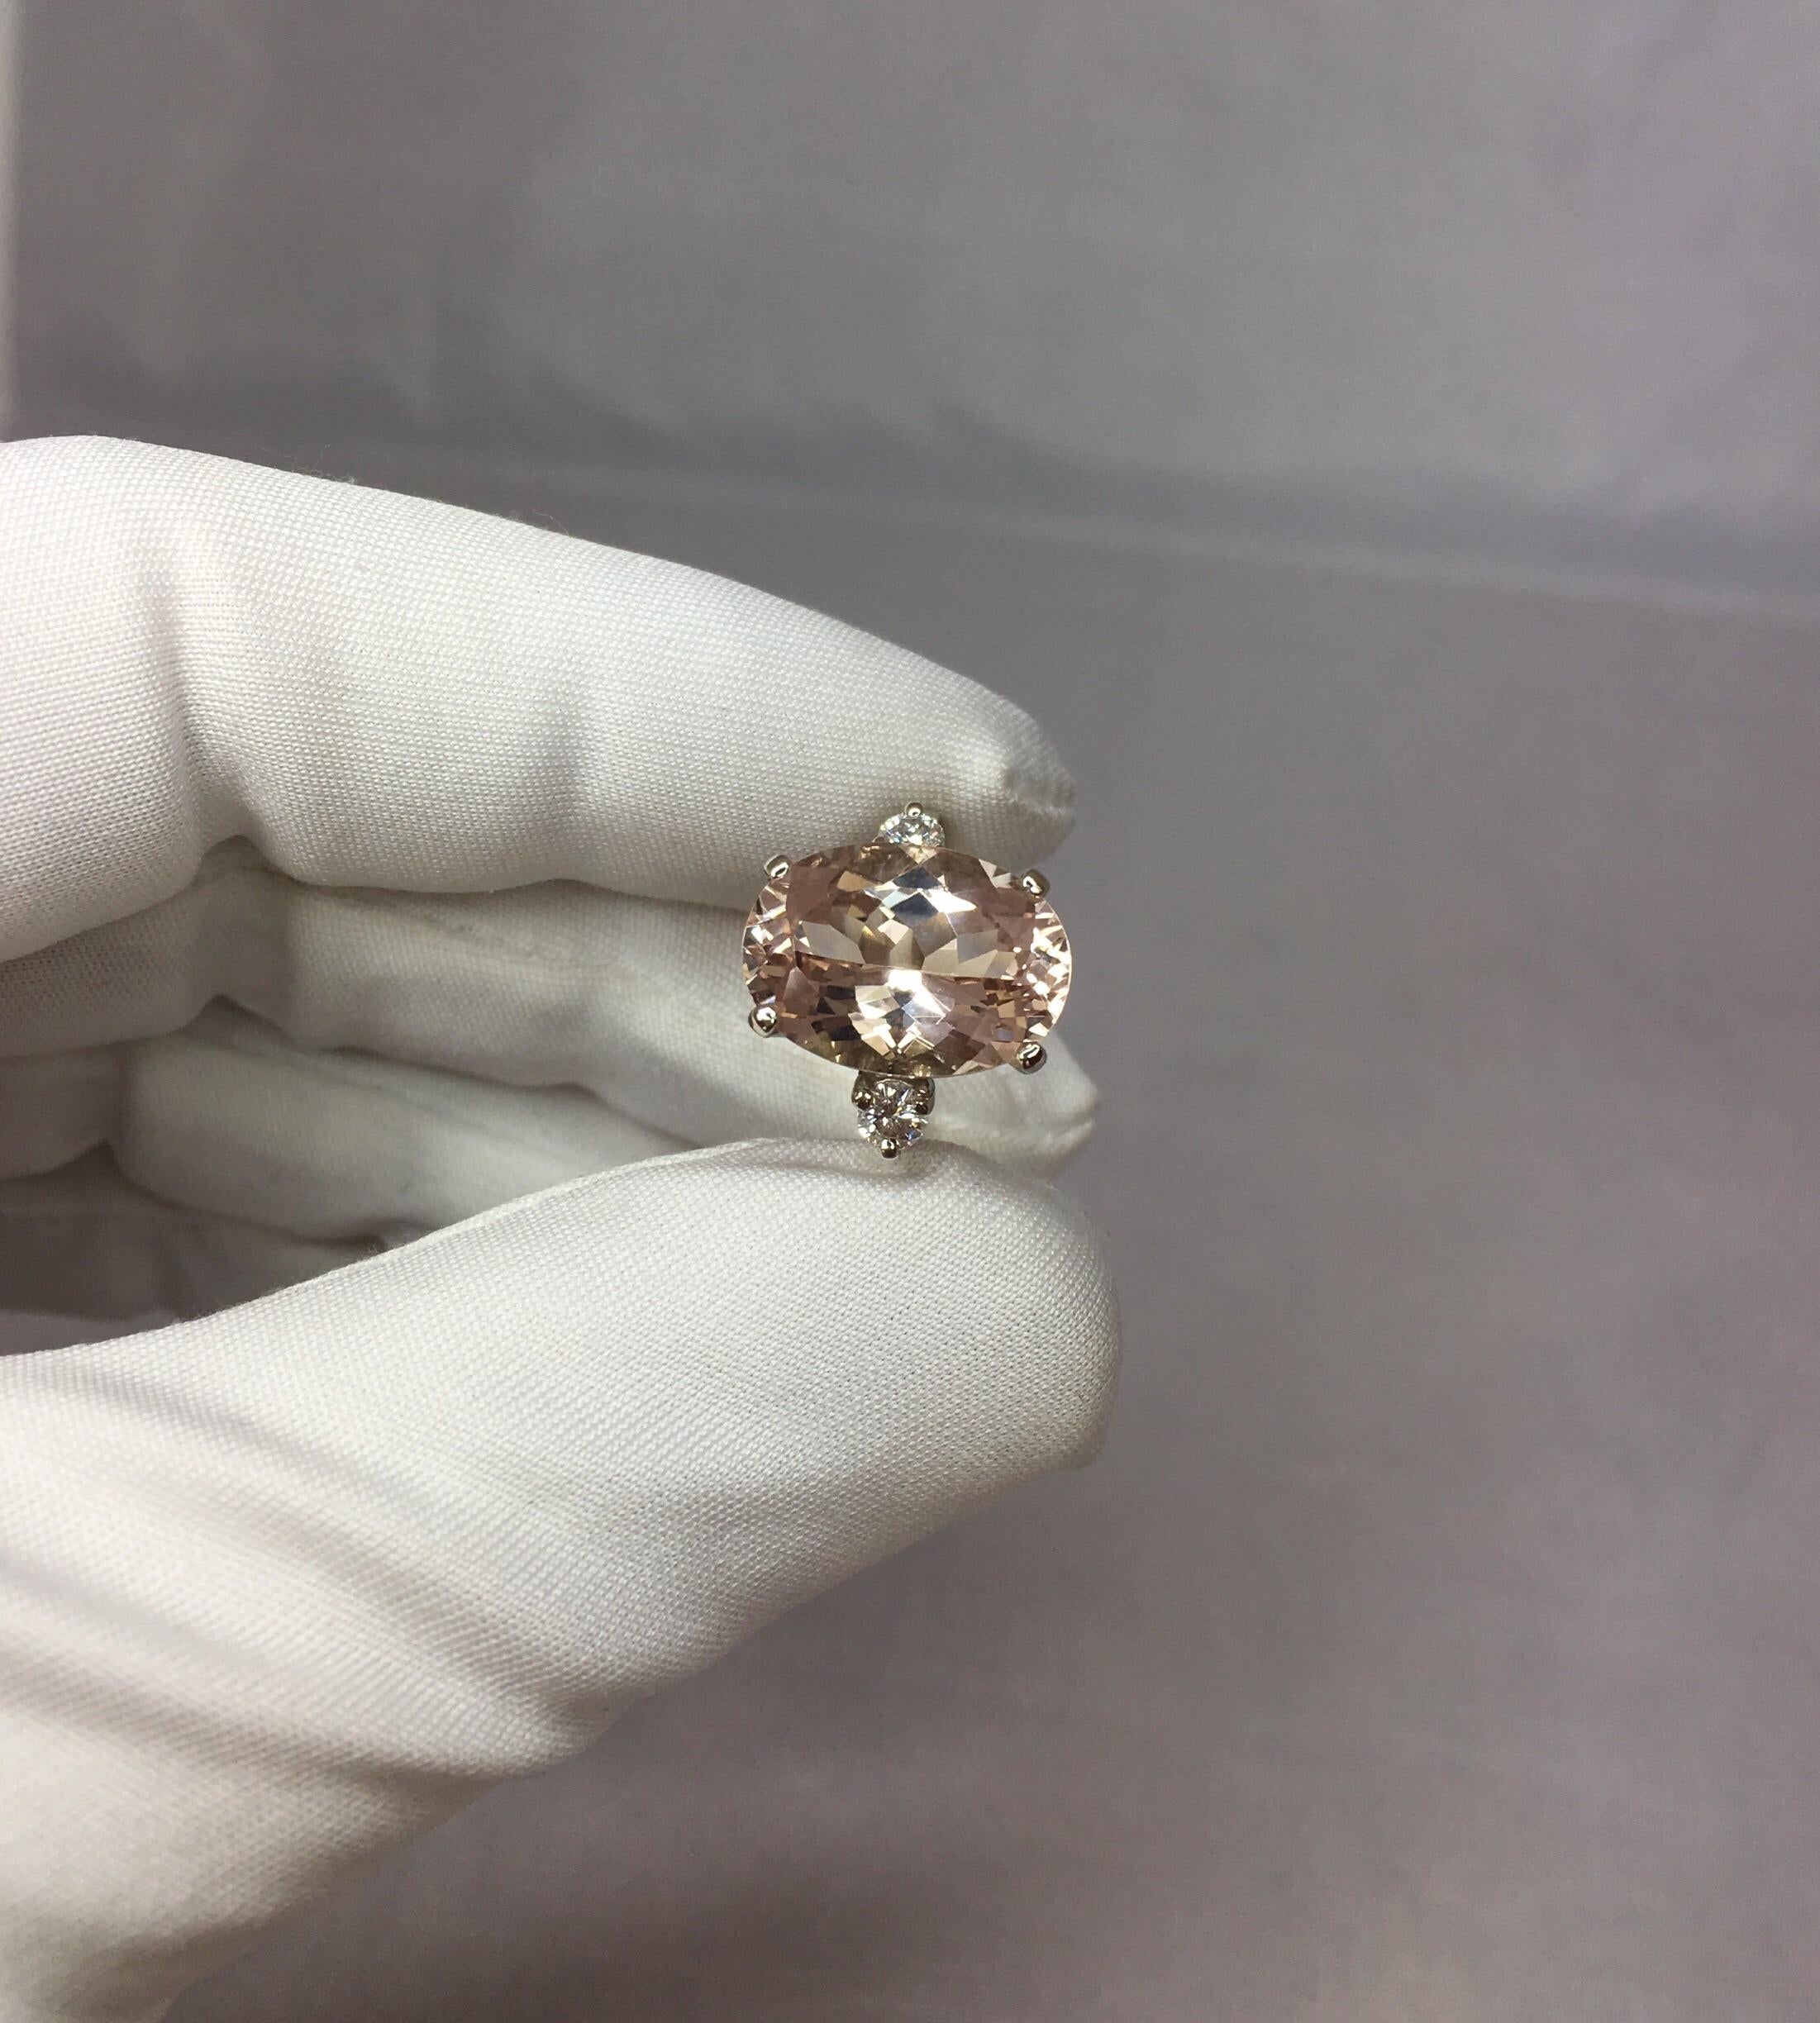 Fine natural morganite and diamond white gold three stone ring.

Large 5.87 carat morganite with a stunning vivid peach pink colour and excellent clarity. Practically flawless.
Also has an excellent fancy antique cushion cut which shows lots of